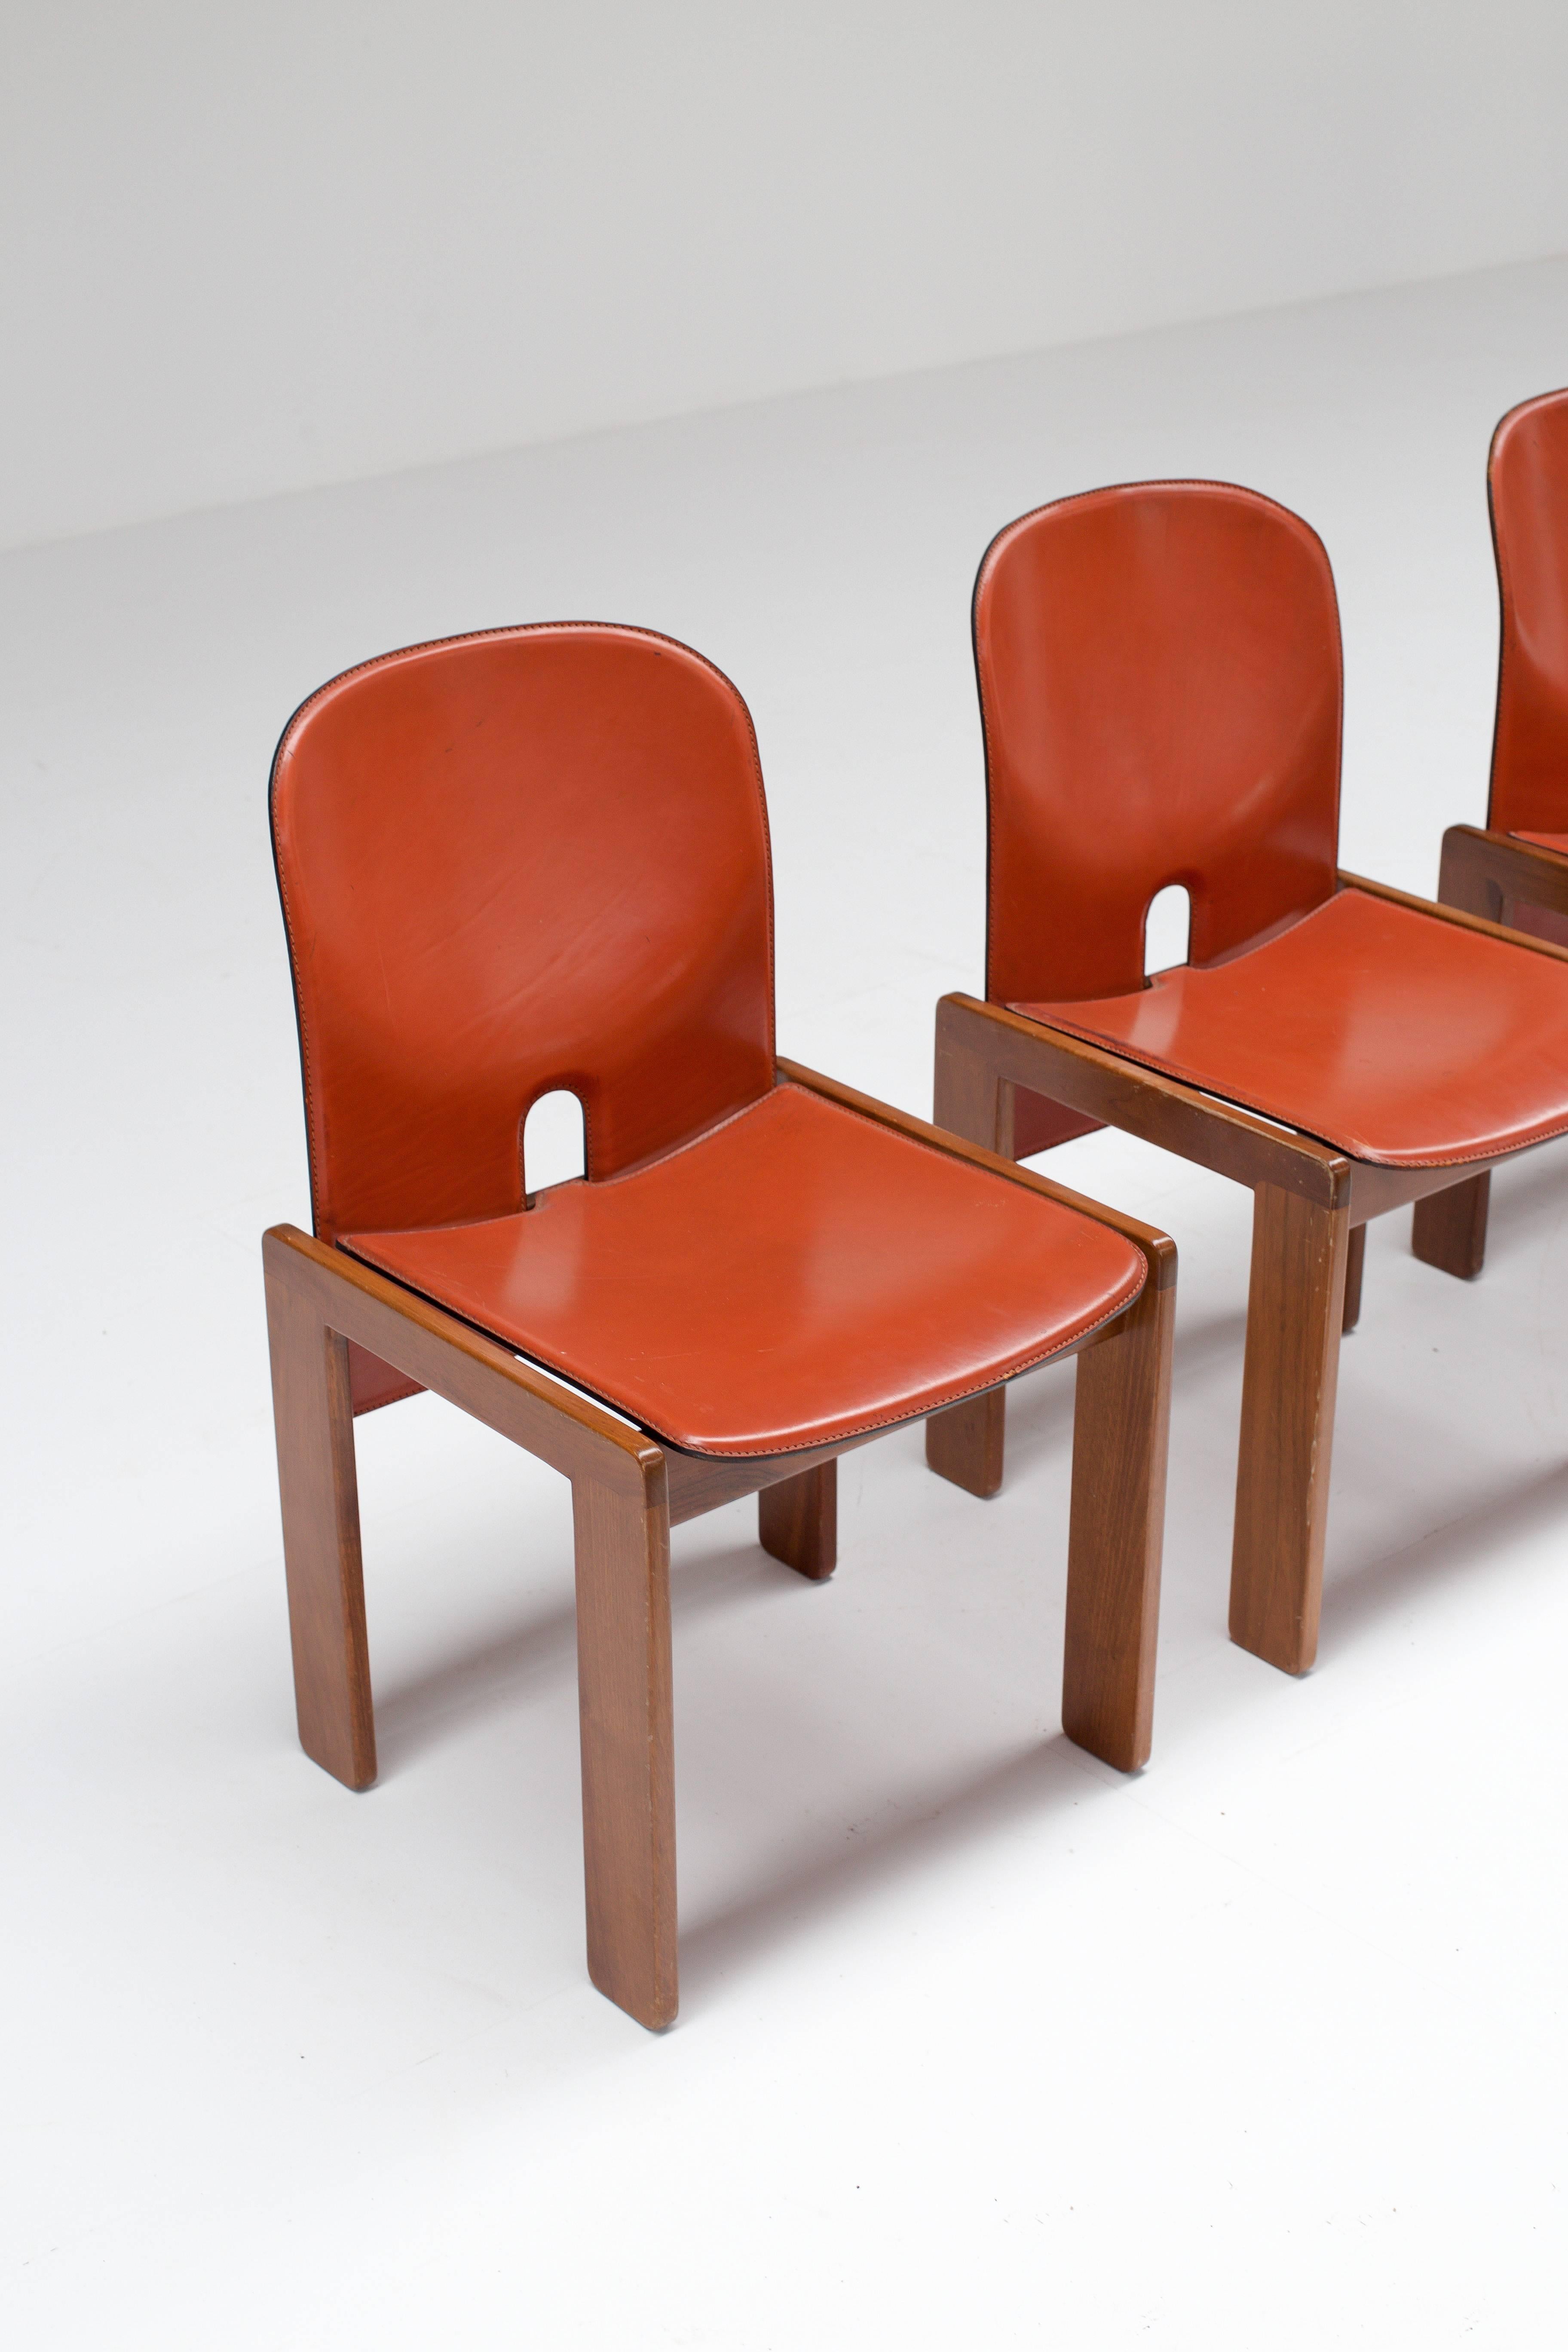 Italian Four Cognac Leather Chairs by Tobia & Afra Scarpa for Cassina